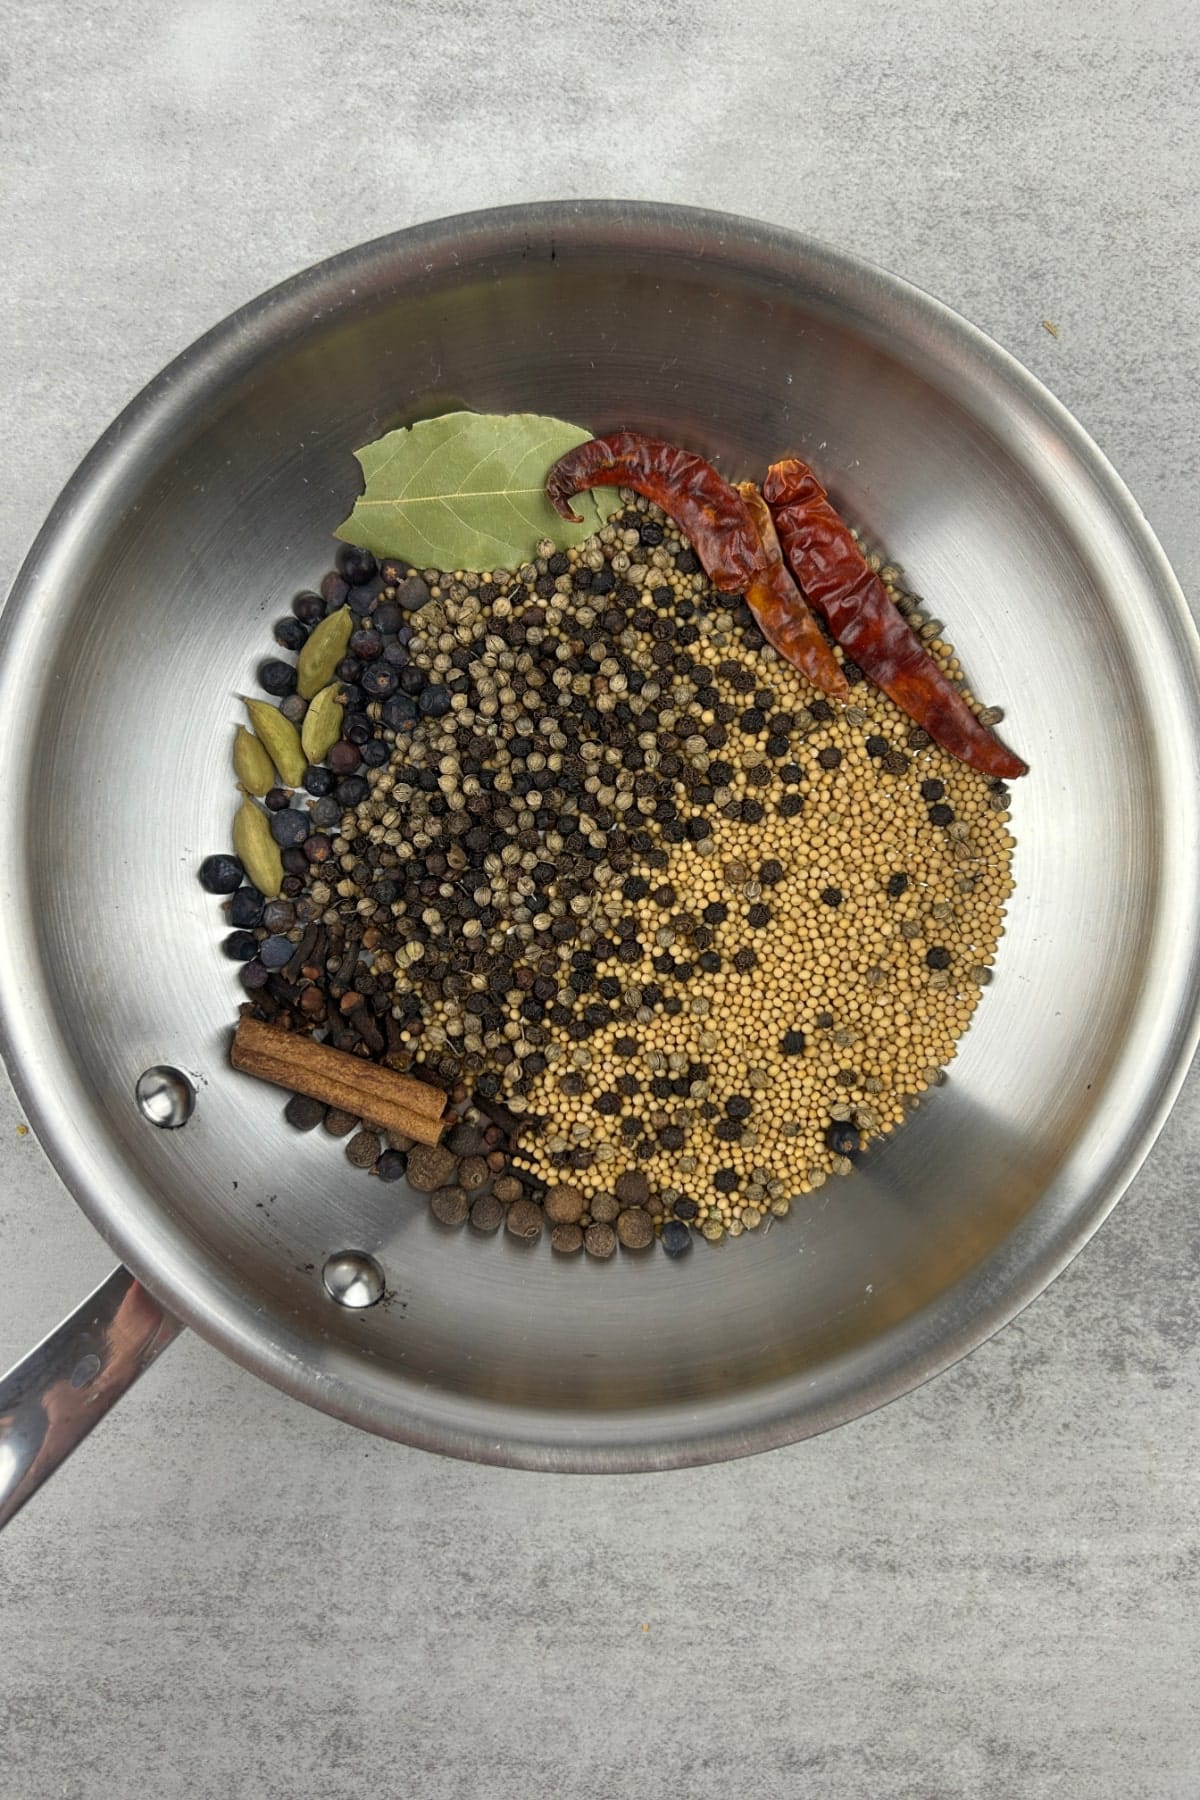 Spices in a frying pan for a corned beef recipe